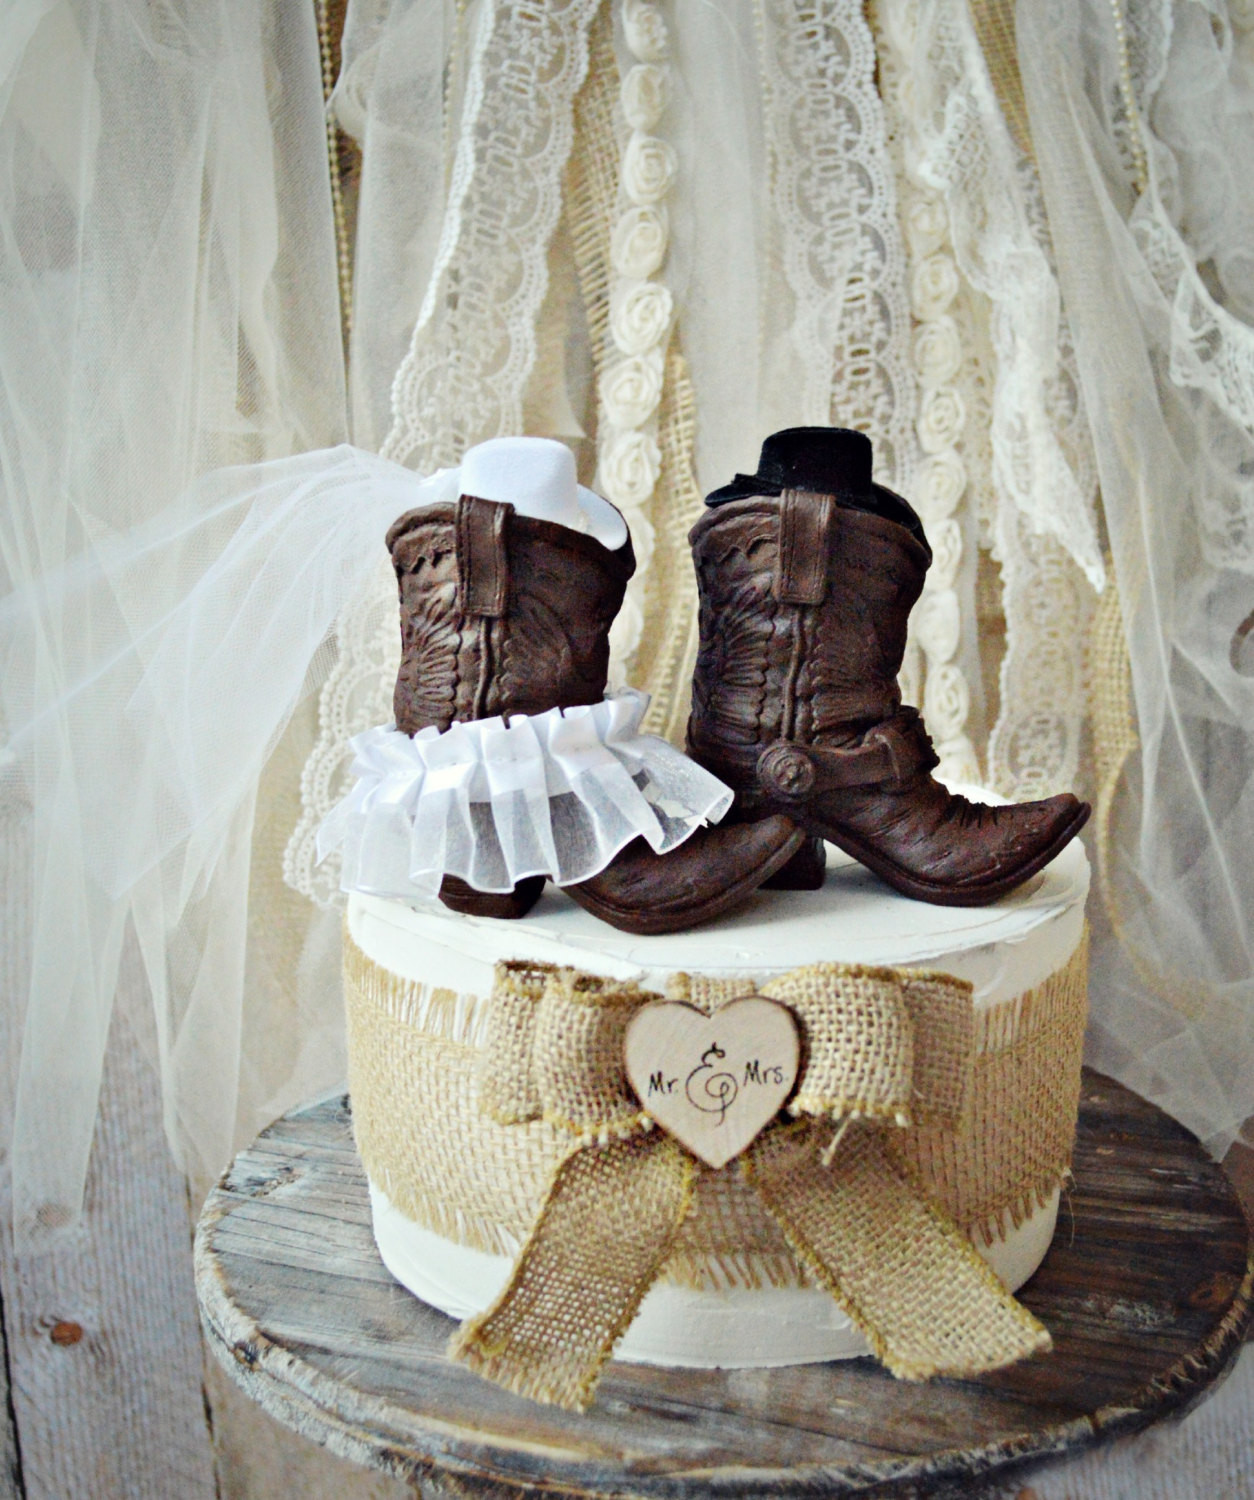 Western Wedding Cake Toppers
 Cowboy Boots Wedding Cake Topper Western Themed Wedding